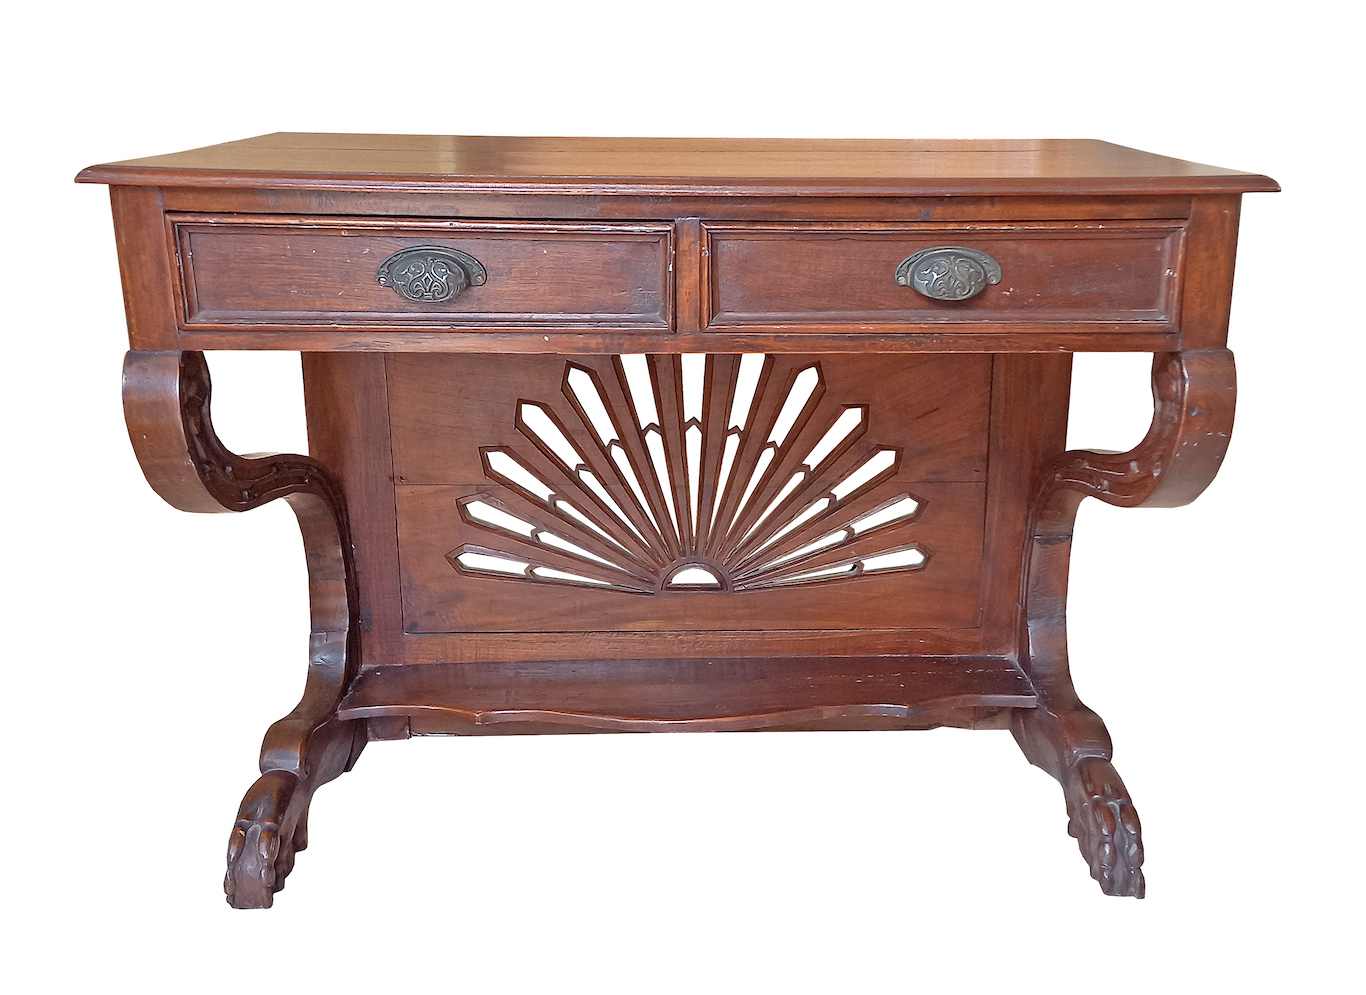 An early 20th century art nouveau carved teak side table